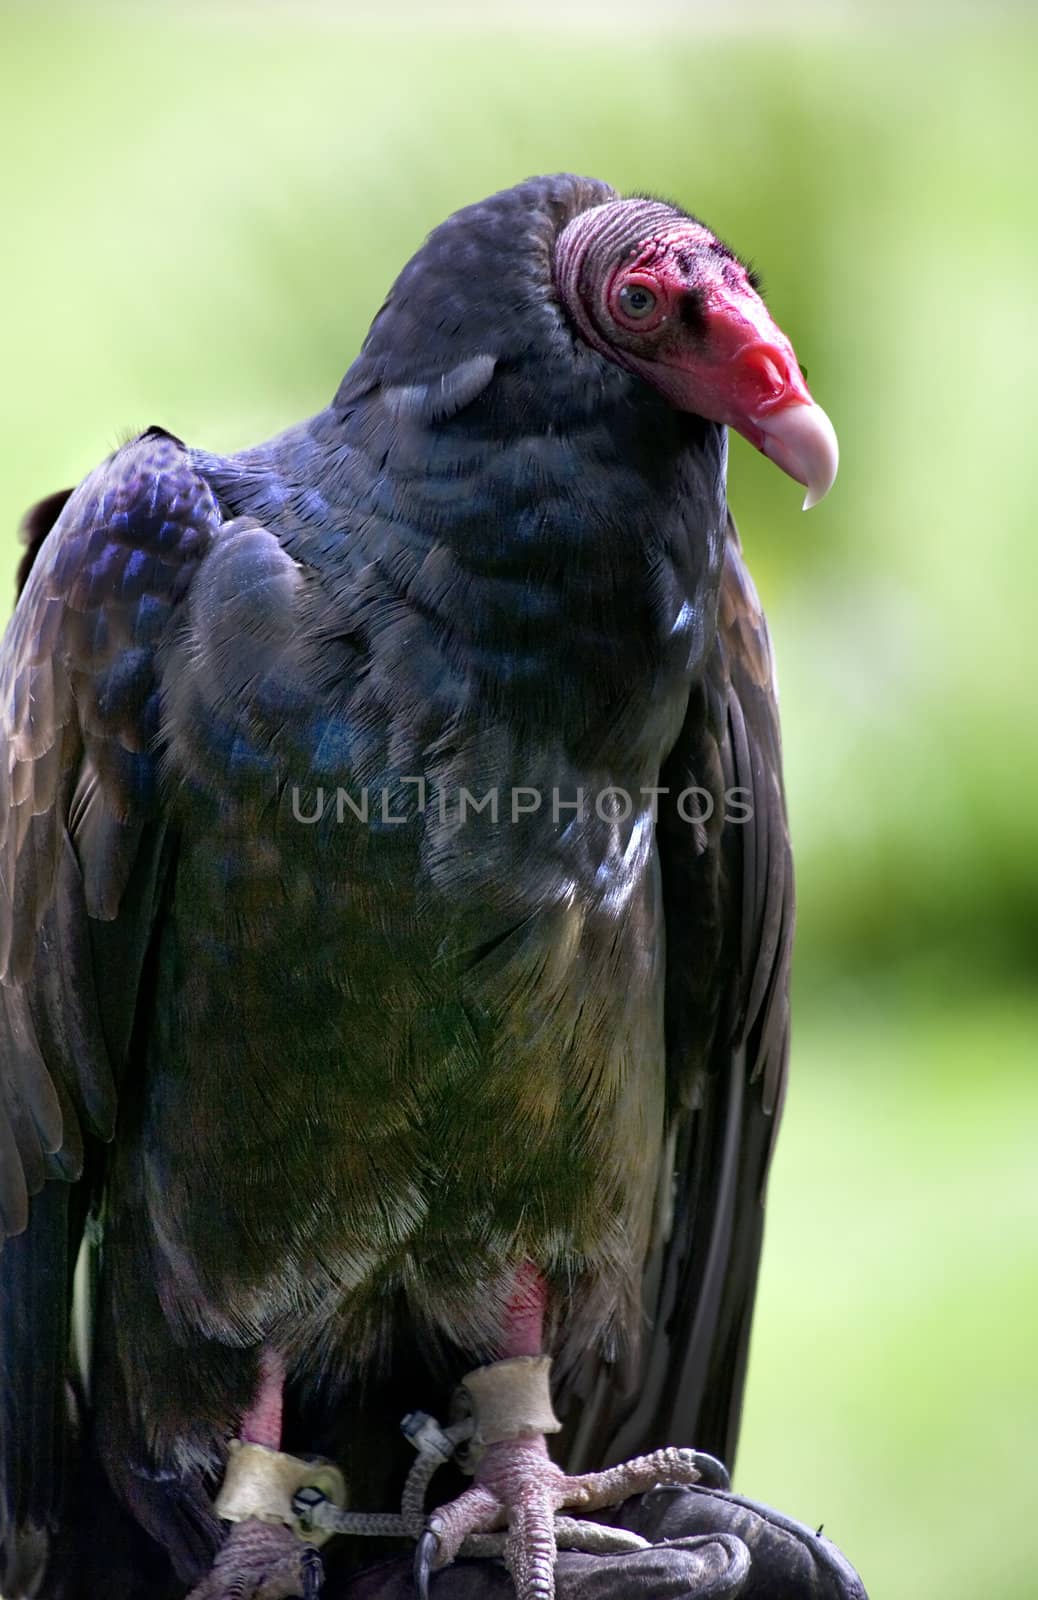 Turkey Vulture with bright red head black body

Resubmit--In response to comments from reviewer have further processed image to reduce noise, adjust lighting and sharpen focus.